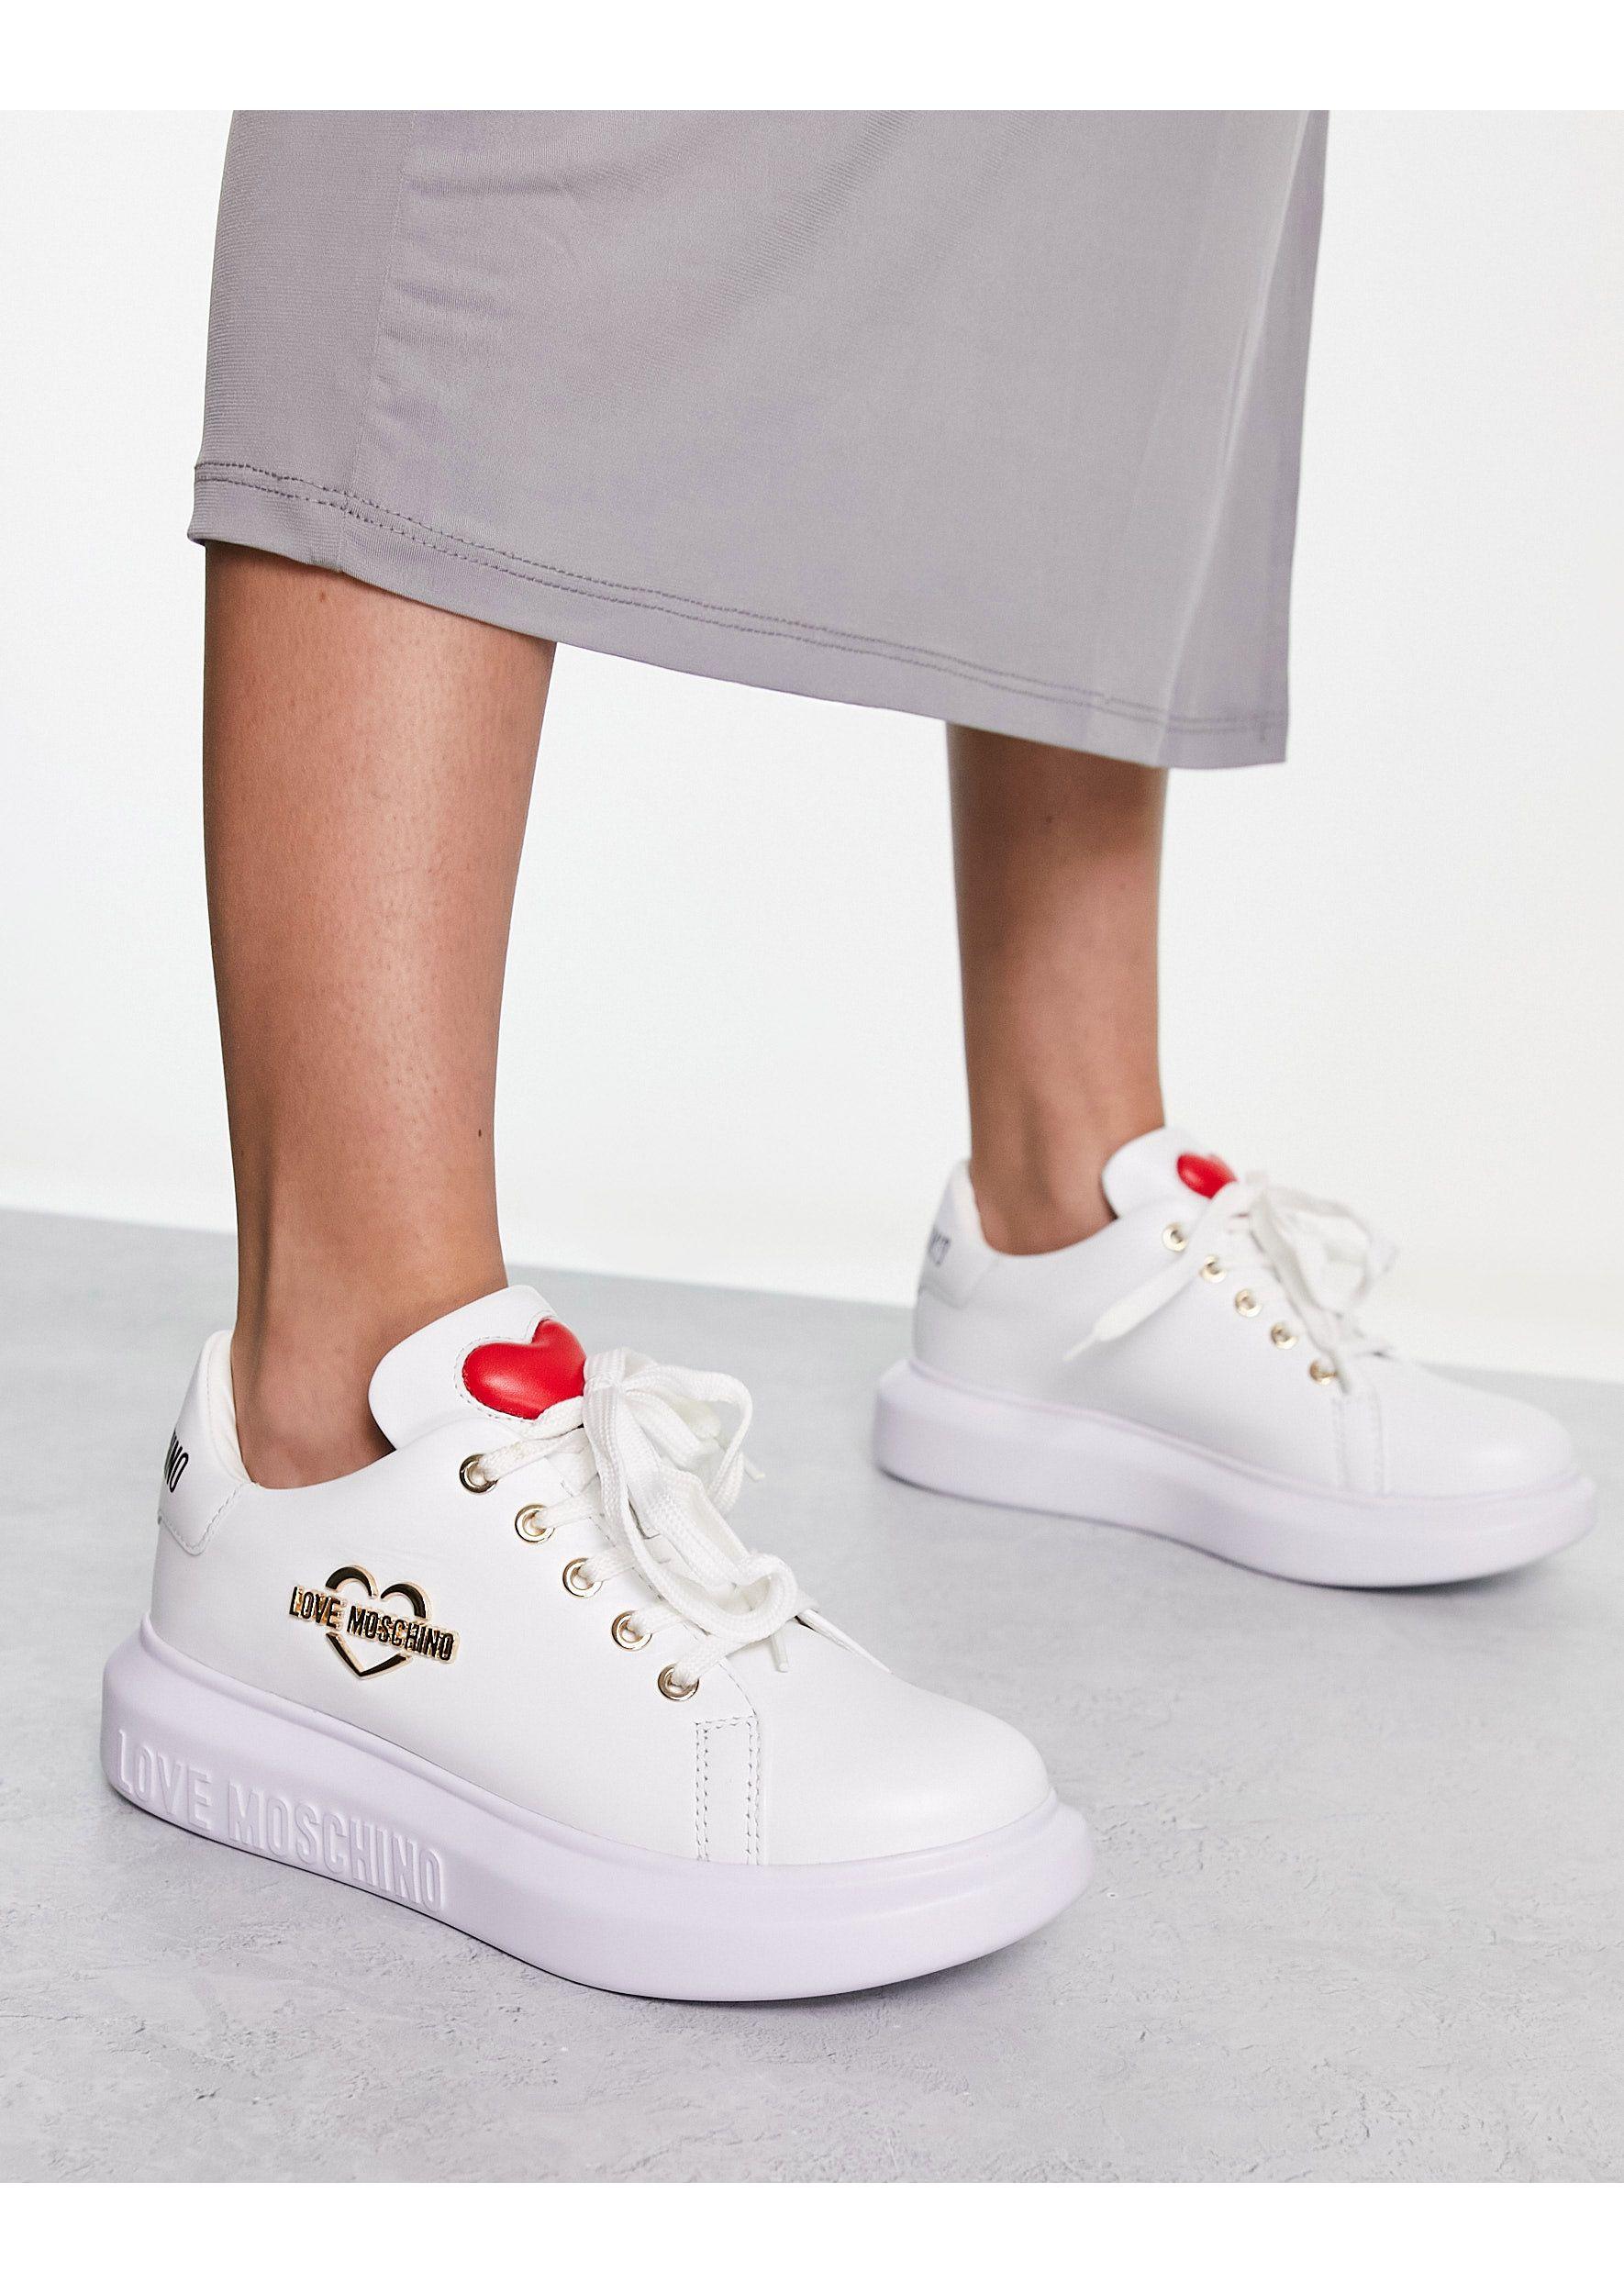 Love Moschino Platform Sneakers With Heart Motif in White | Lyst